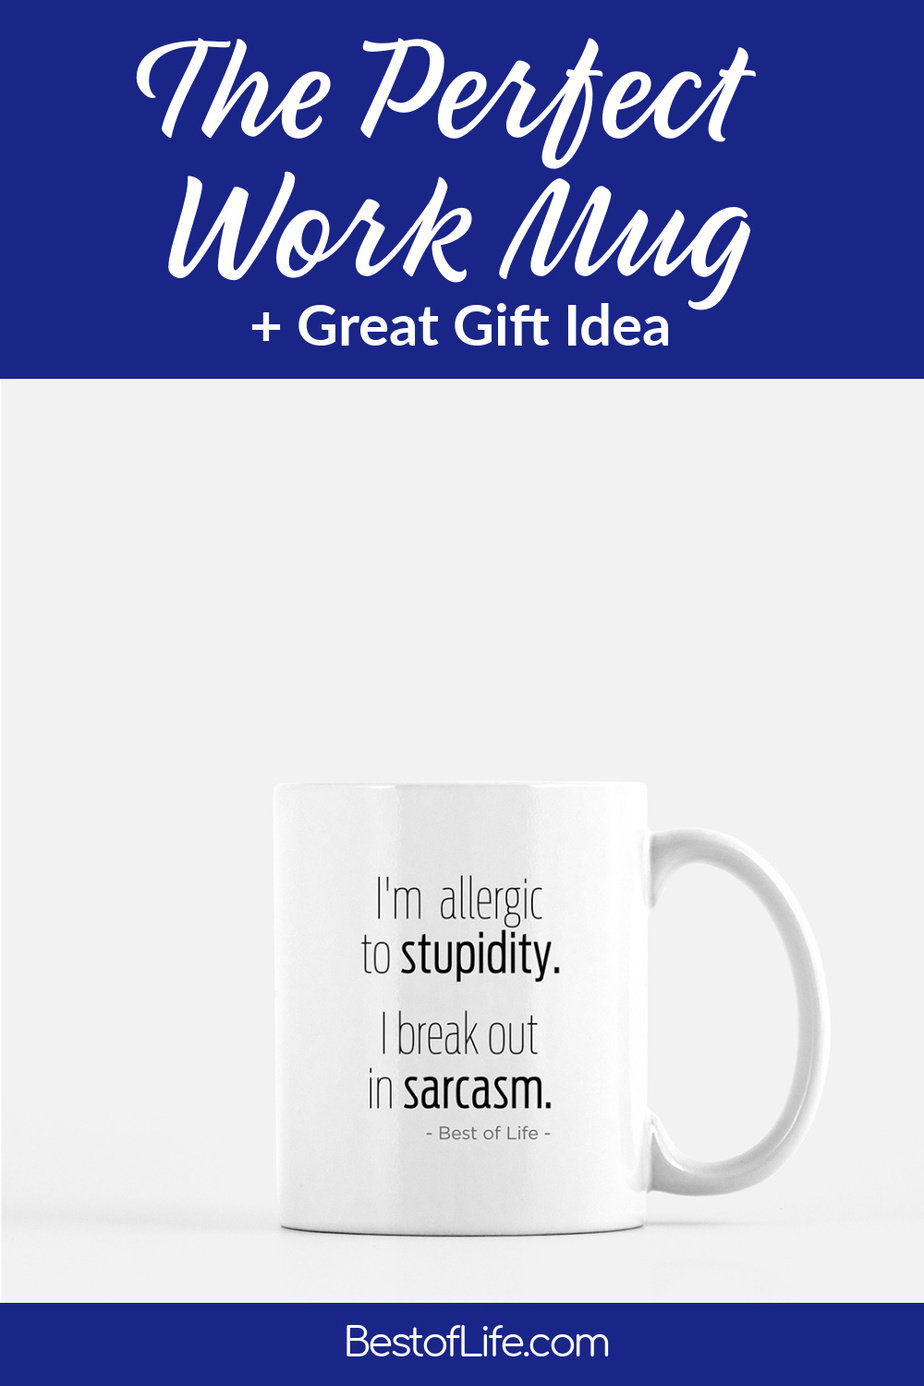 Like a medical bracelet for your coffee - this coffee mug lets others know of your condition with quote "I'm allergic to stupidity. I breakout in sarcasm." Sarcastic Quotes | Funny Quotes for Work | Father's Day Gift Ideas | Mother's Day Gift Ideas | Gift Ideas for Guys | Quotes and Inspiration via @thebestoflife